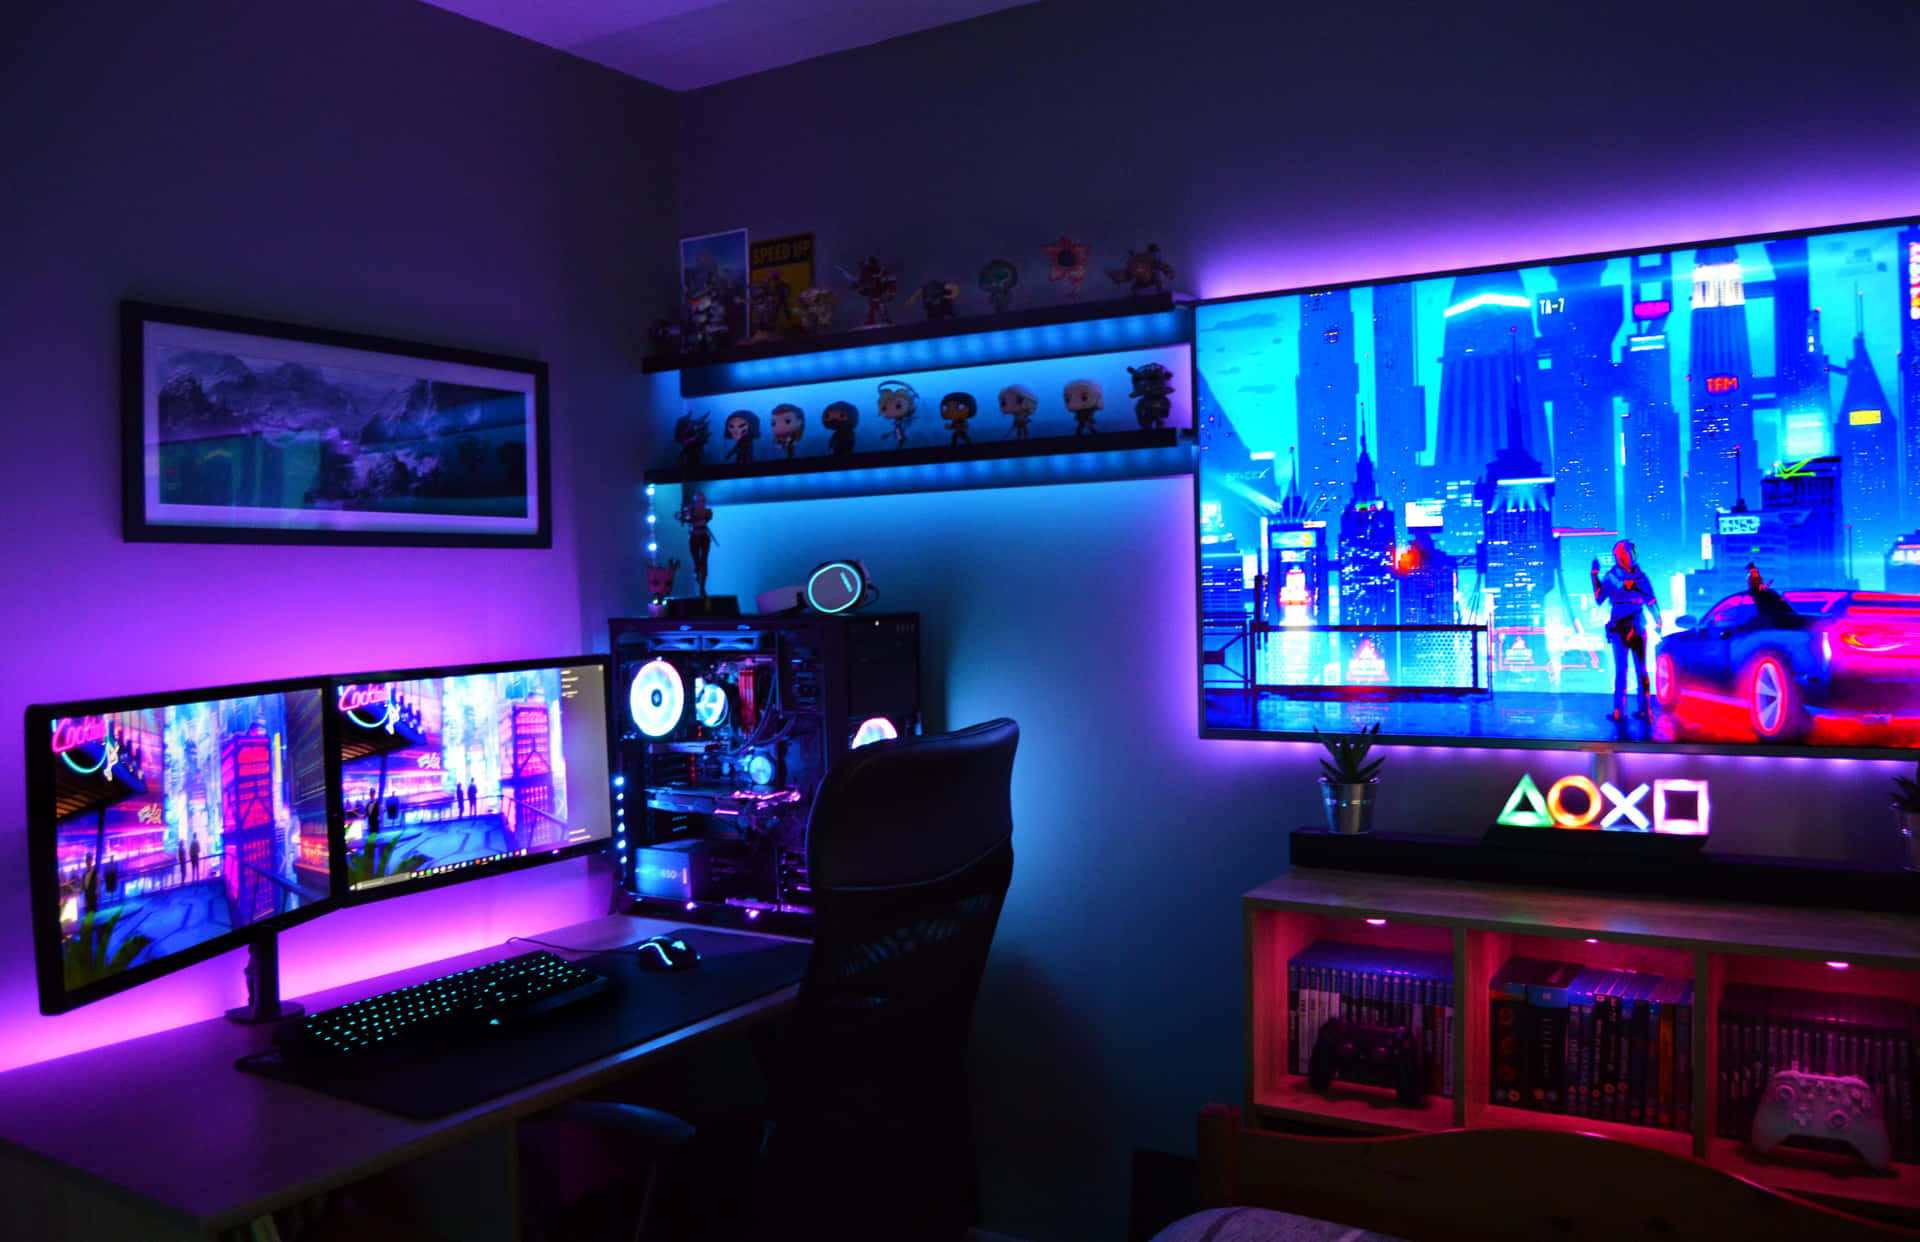 Turn your living space into your ultimate gaming room